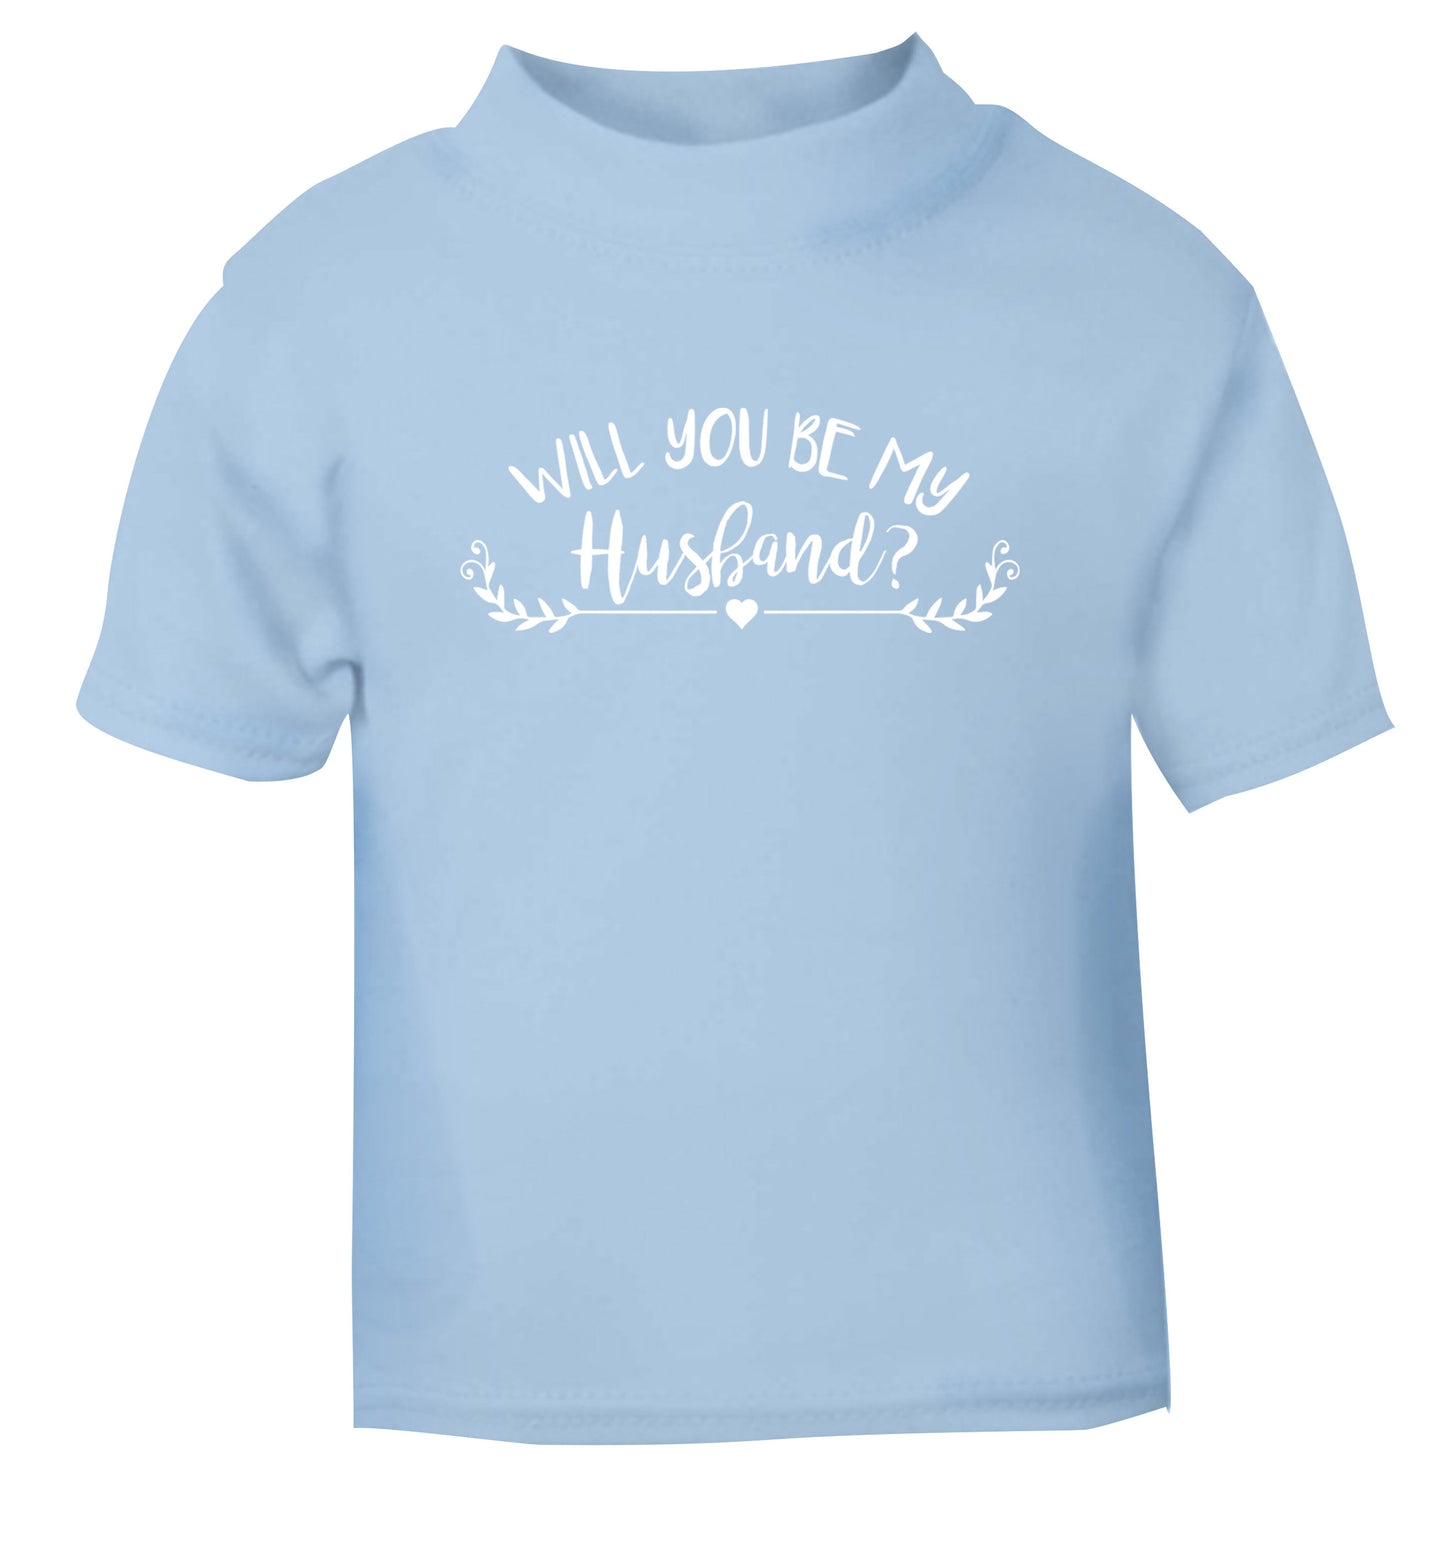 Will you be my husband? light blue Baby Toddler Tshirt 2 Years